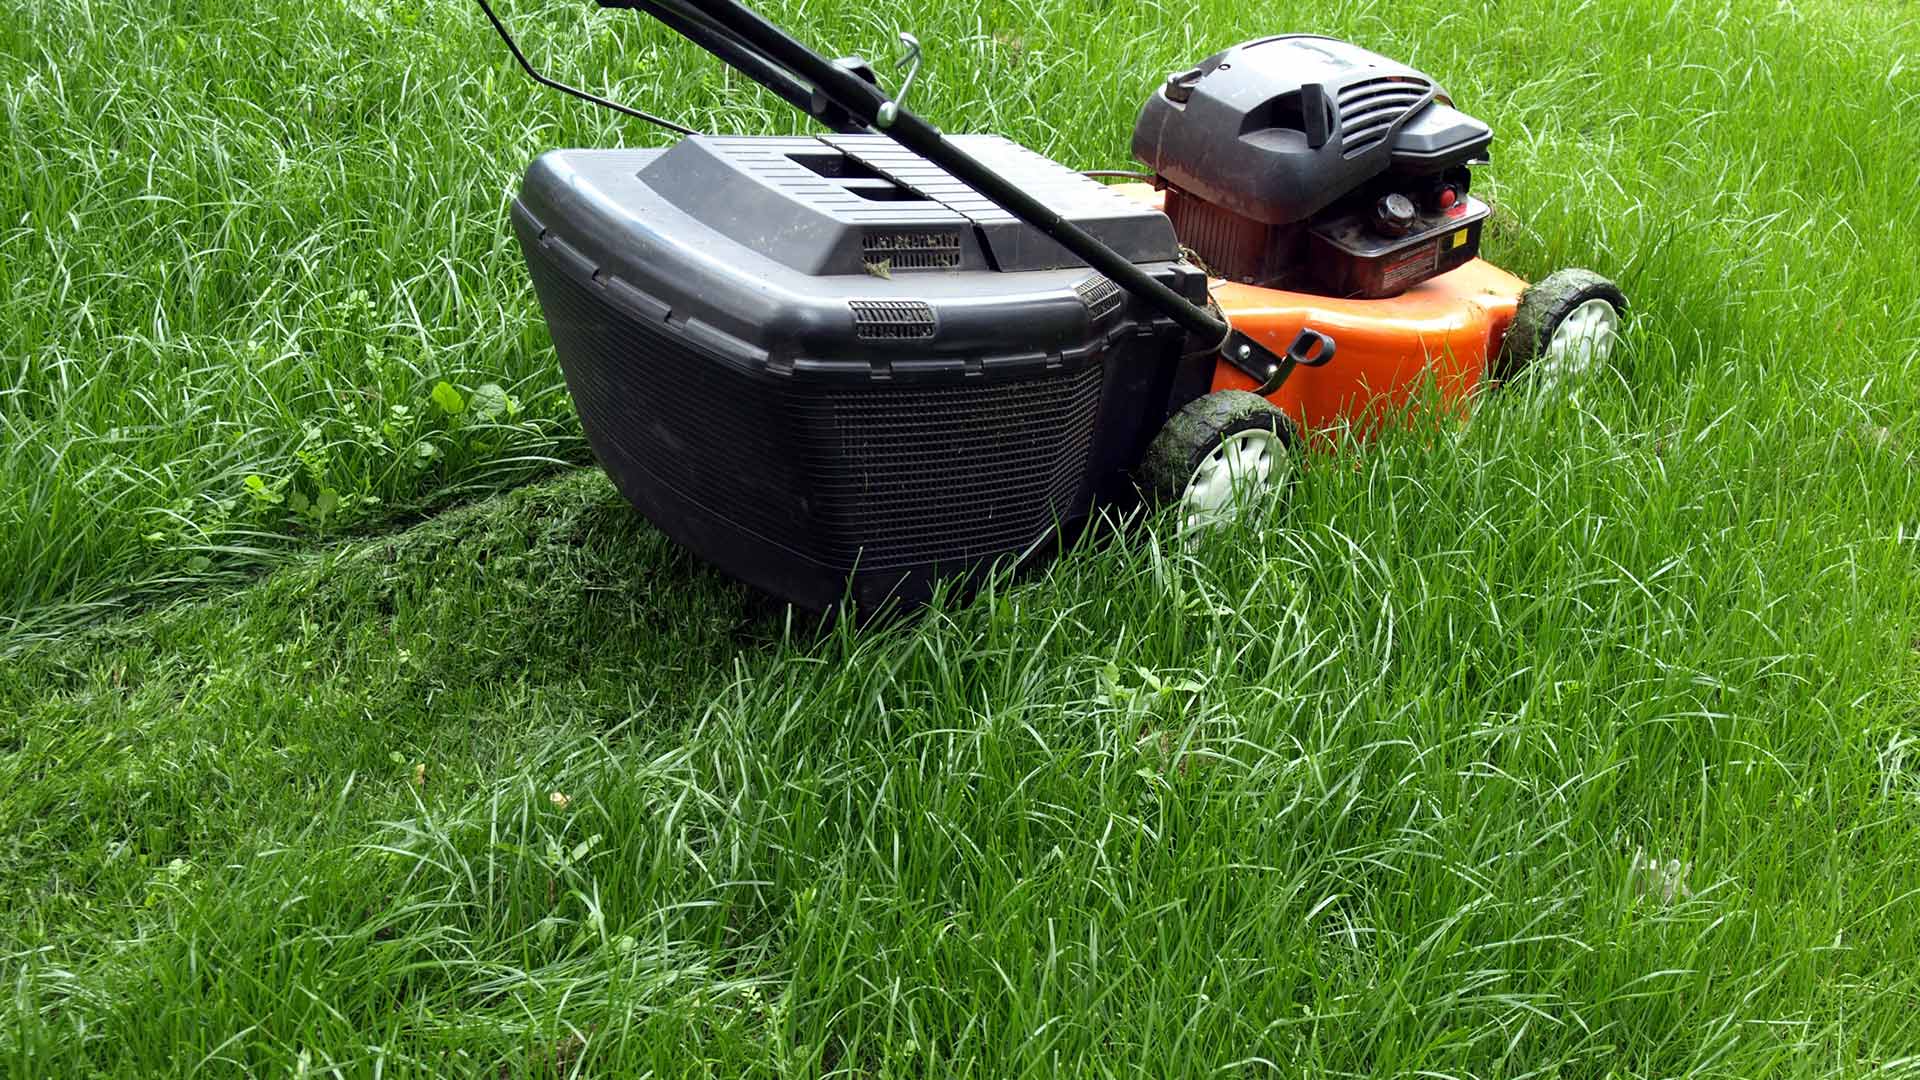 Summer Lawn Care: Mowing